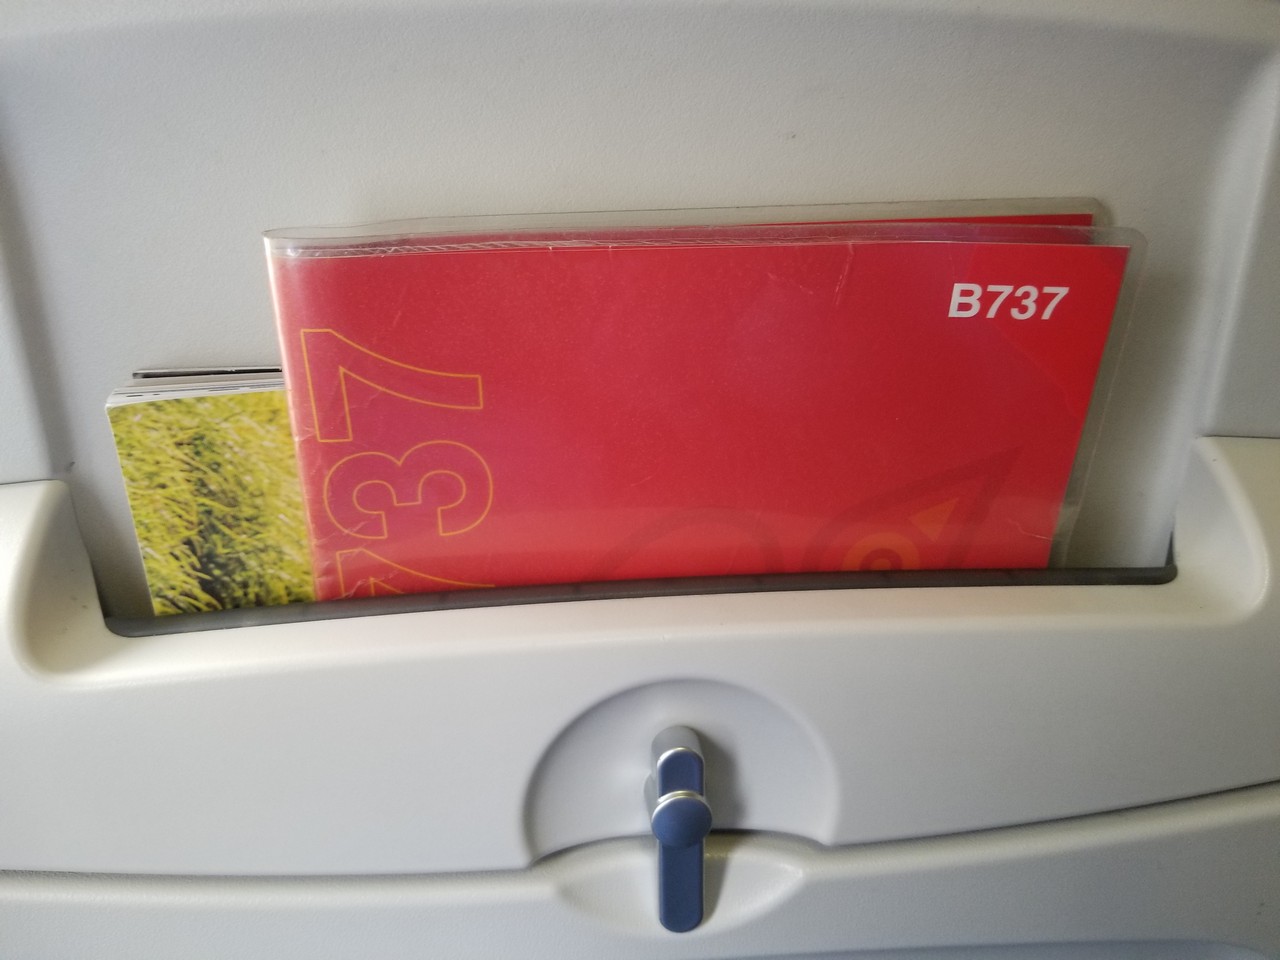 a red folder in a plastic holder